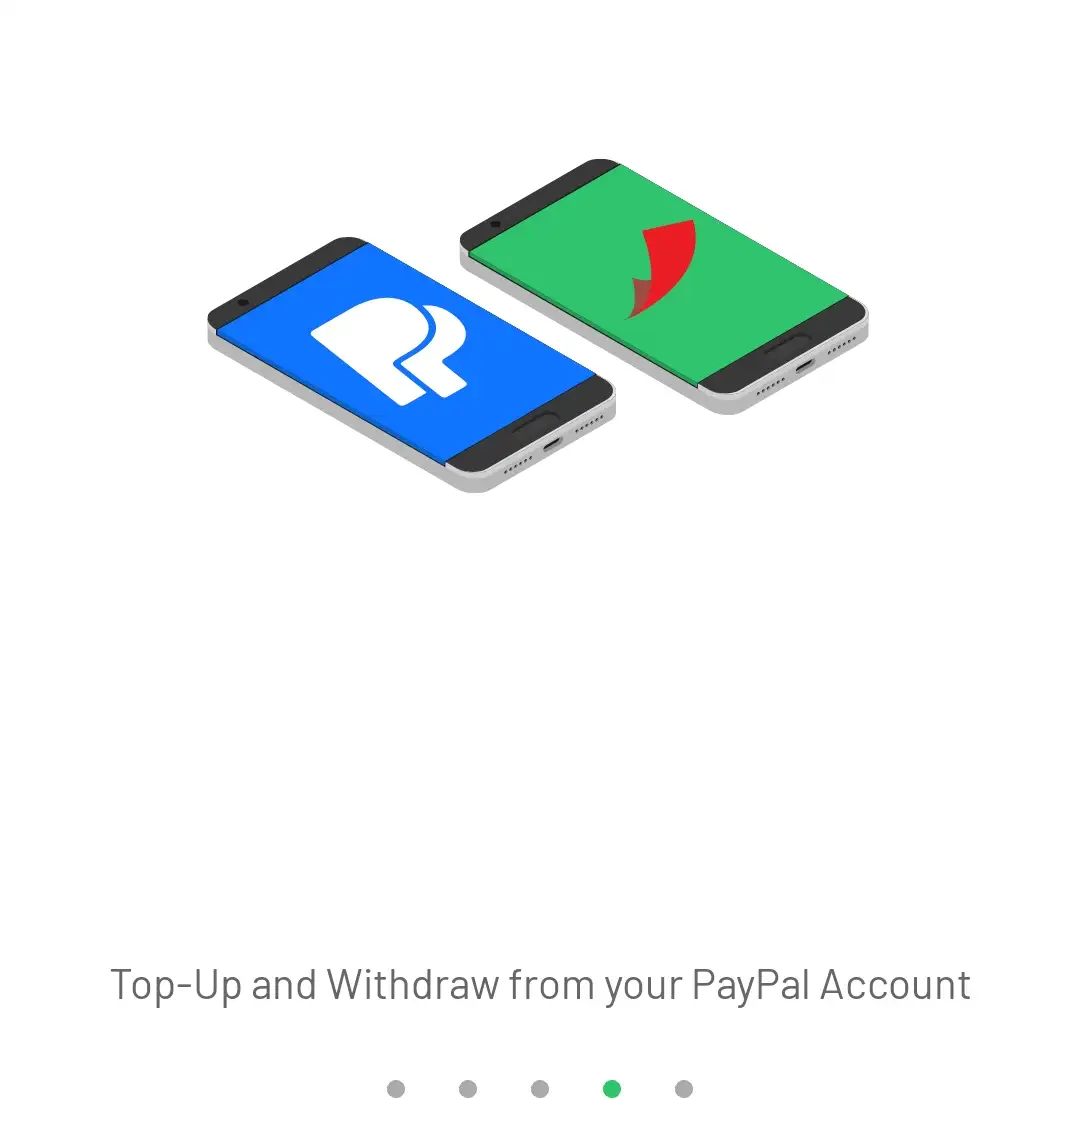 Top-up and withdraw from PayPal using Mpesa app